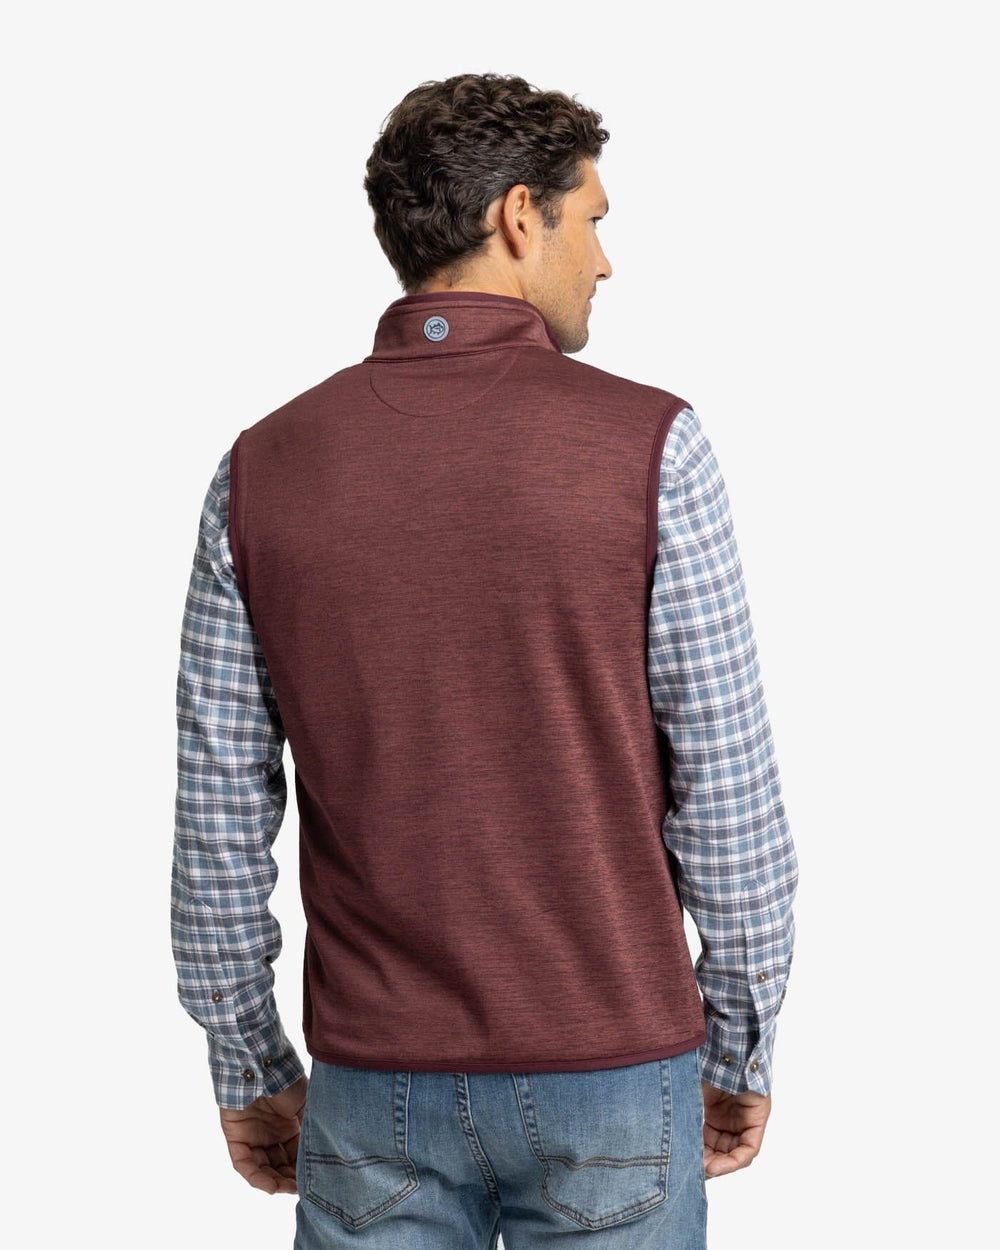 The back view of the Southern Tide Baybrook Heather Vest by Southern Tide - Heather Bordeaux Red